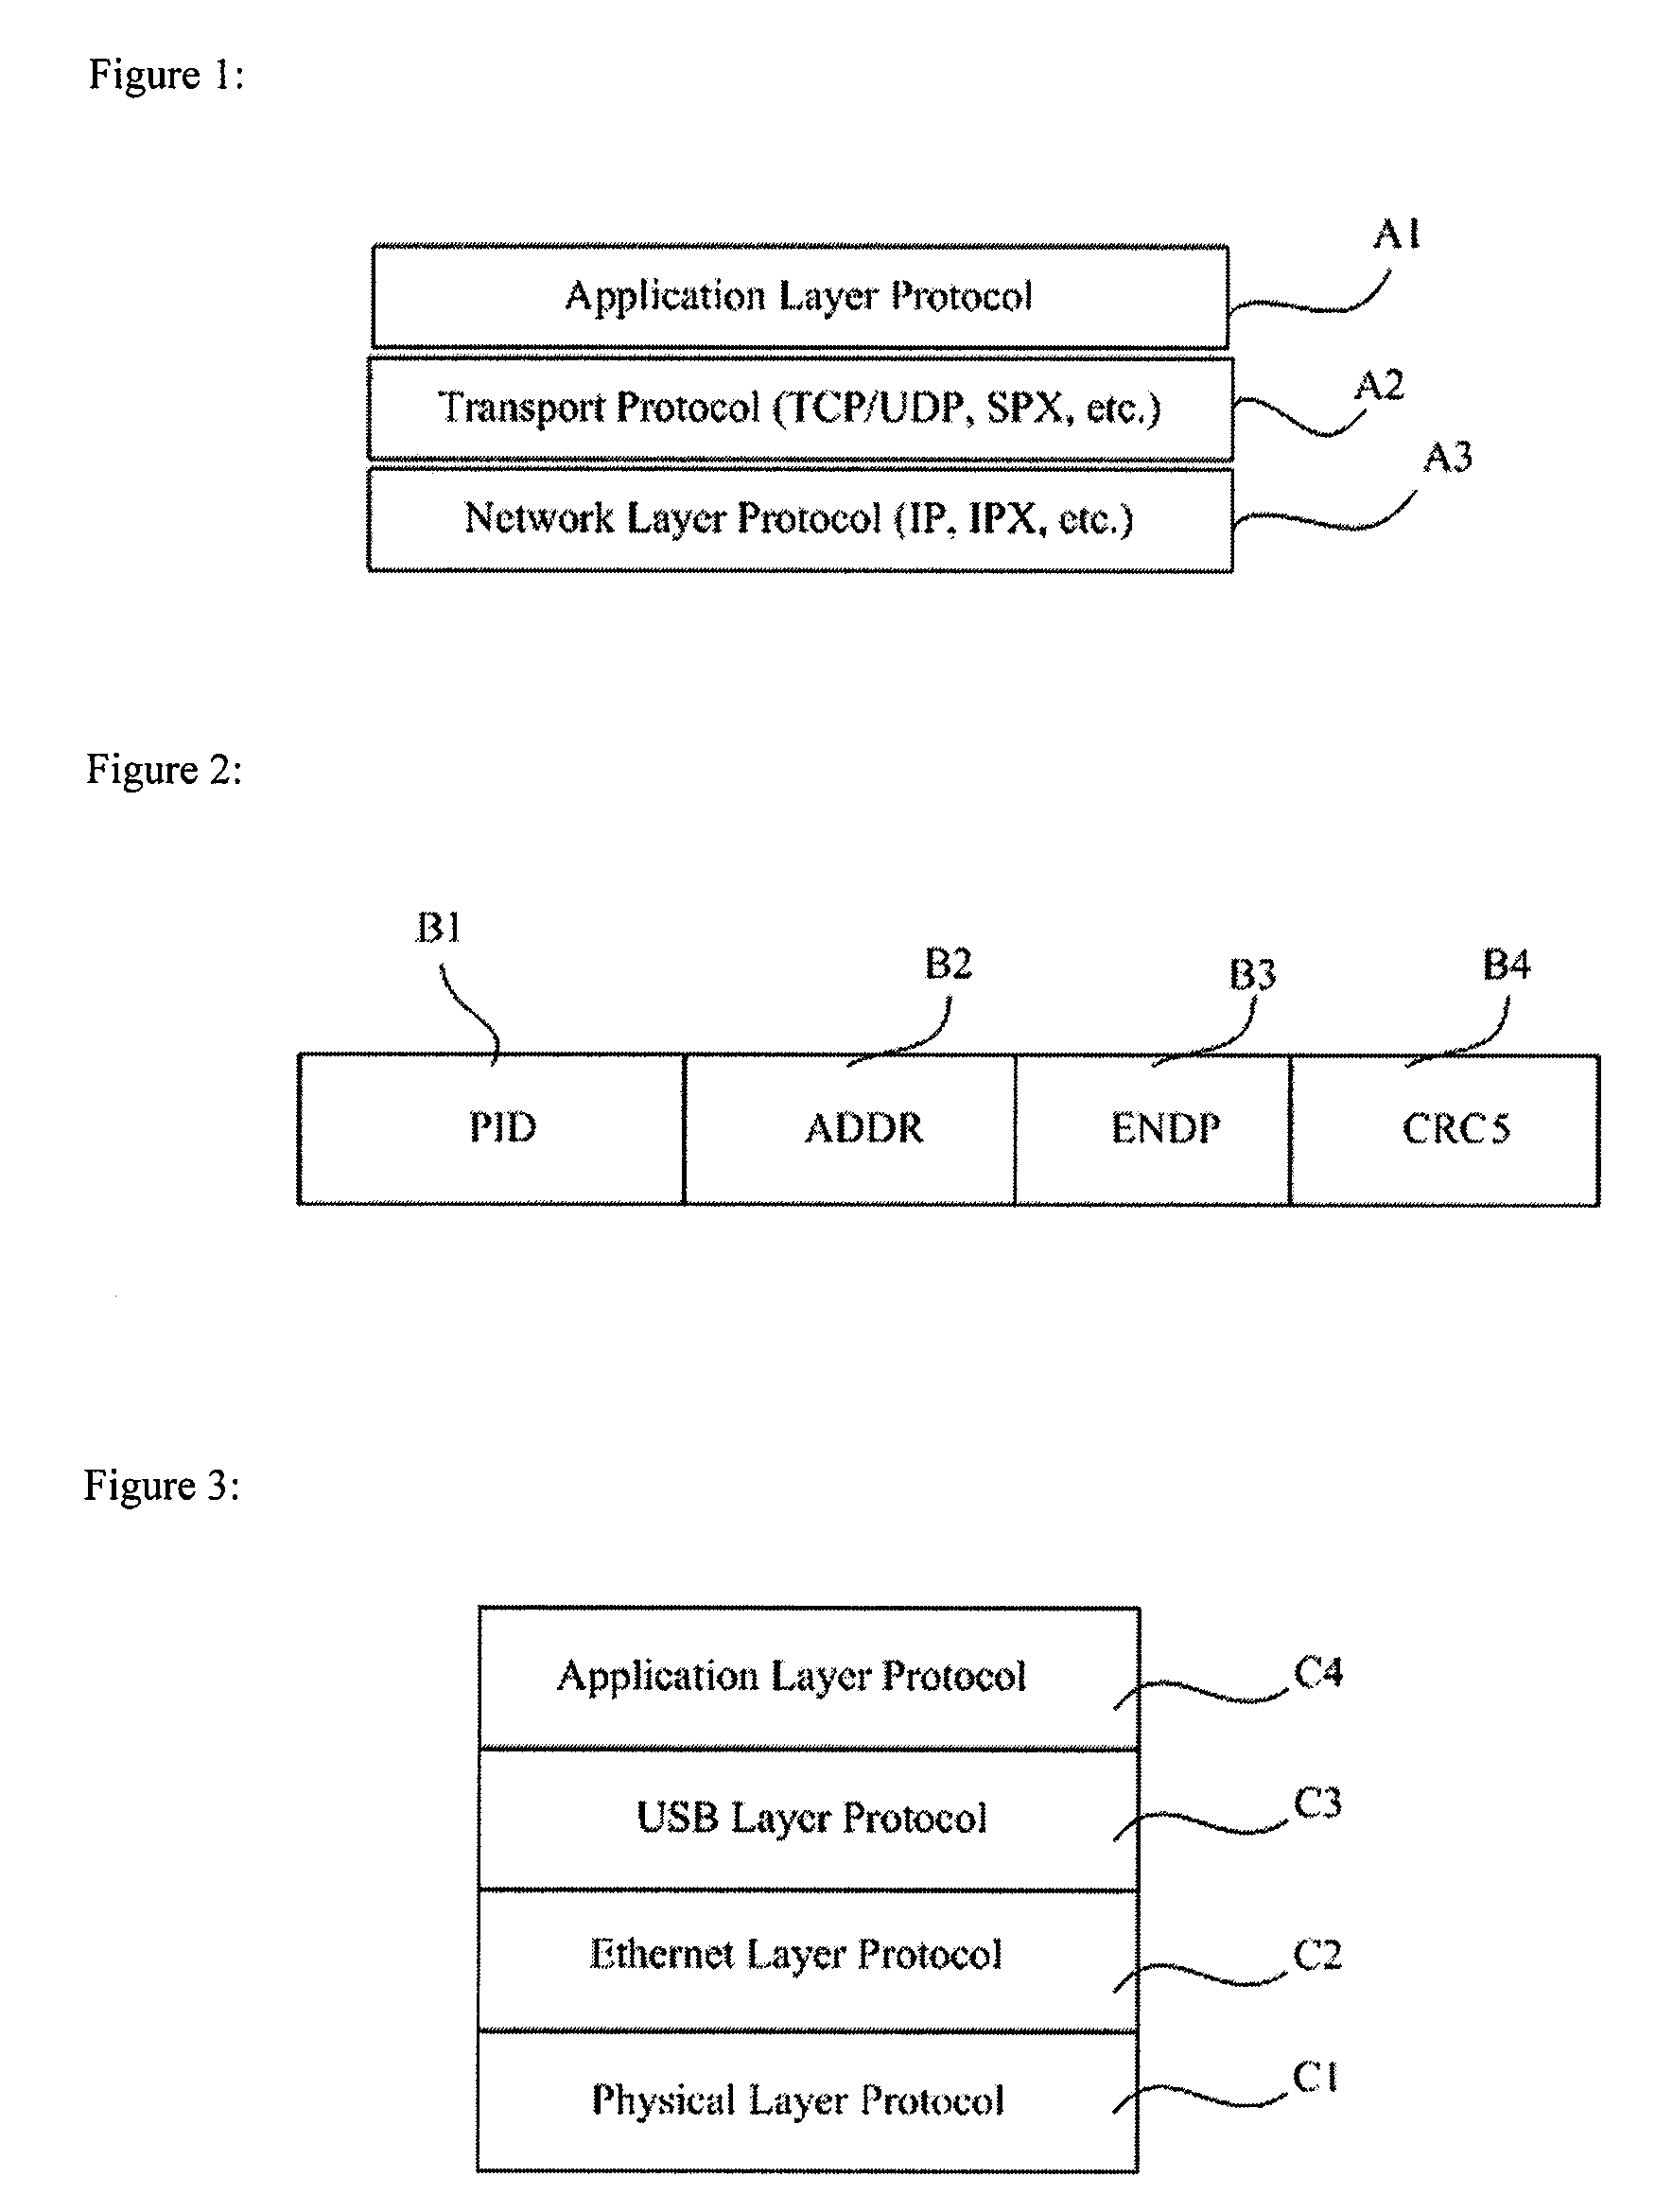 Method for assigning address to the intelligent information household appliance and the sub-equipment in the household network